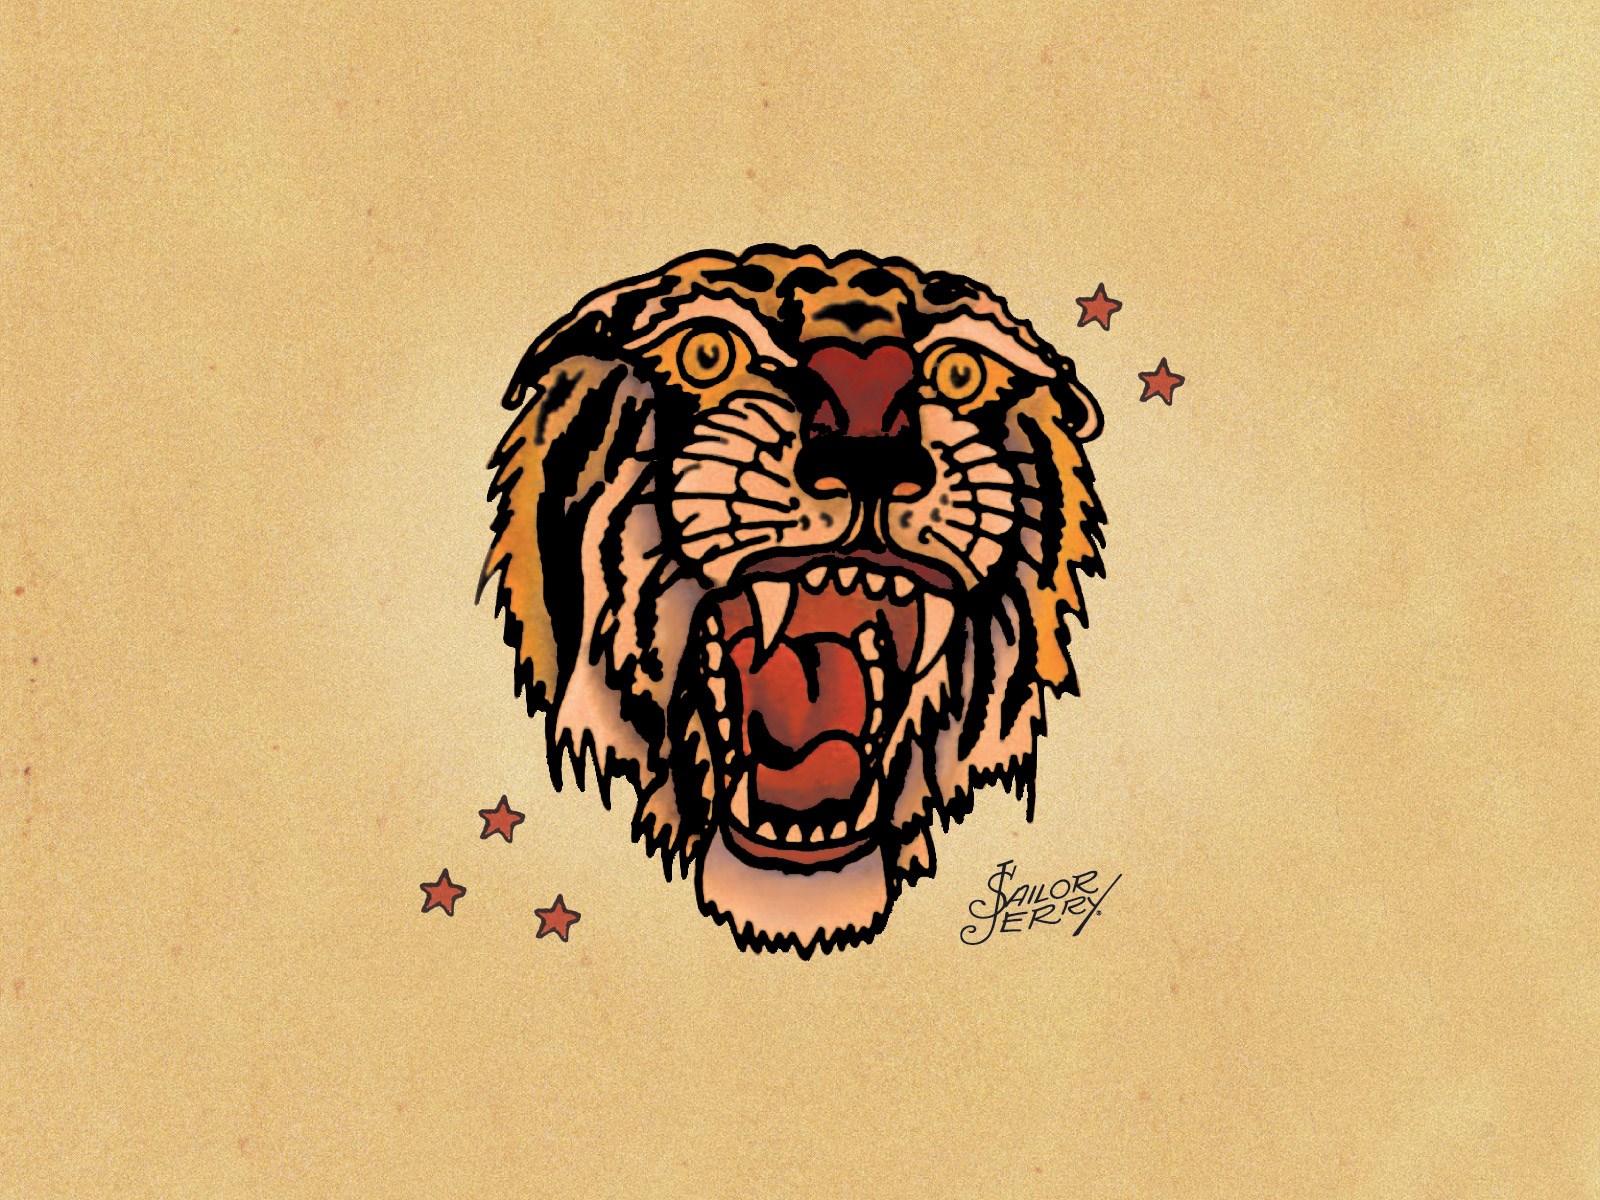 Jerry the Sailor Tattoo Tiger Small Patch 3.5 x 4.0 inch embroidered white